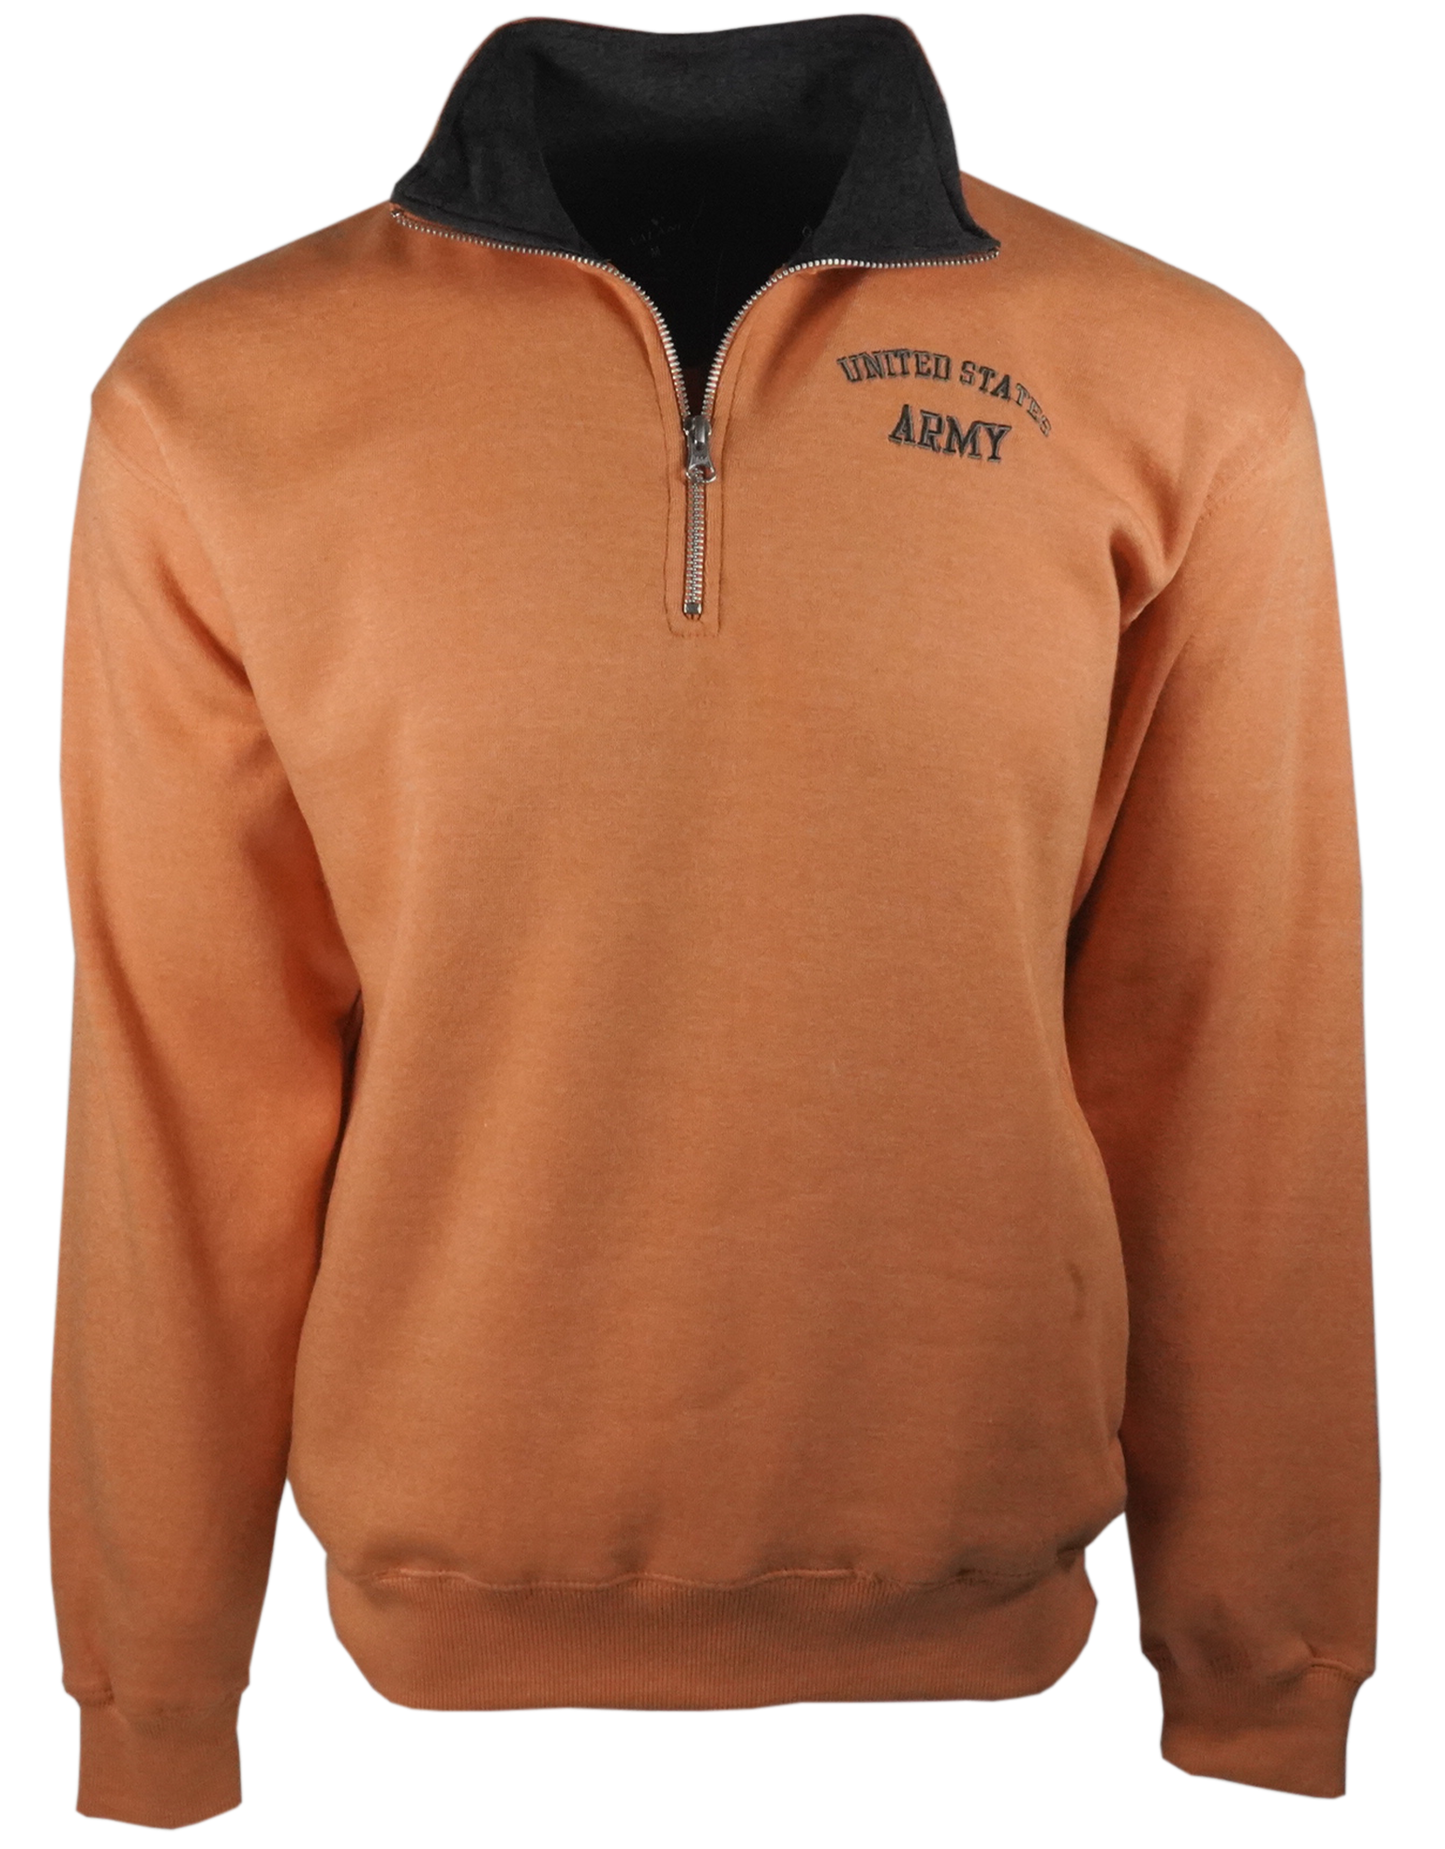 United States Army on Fleece 1/4 Zip Pullover